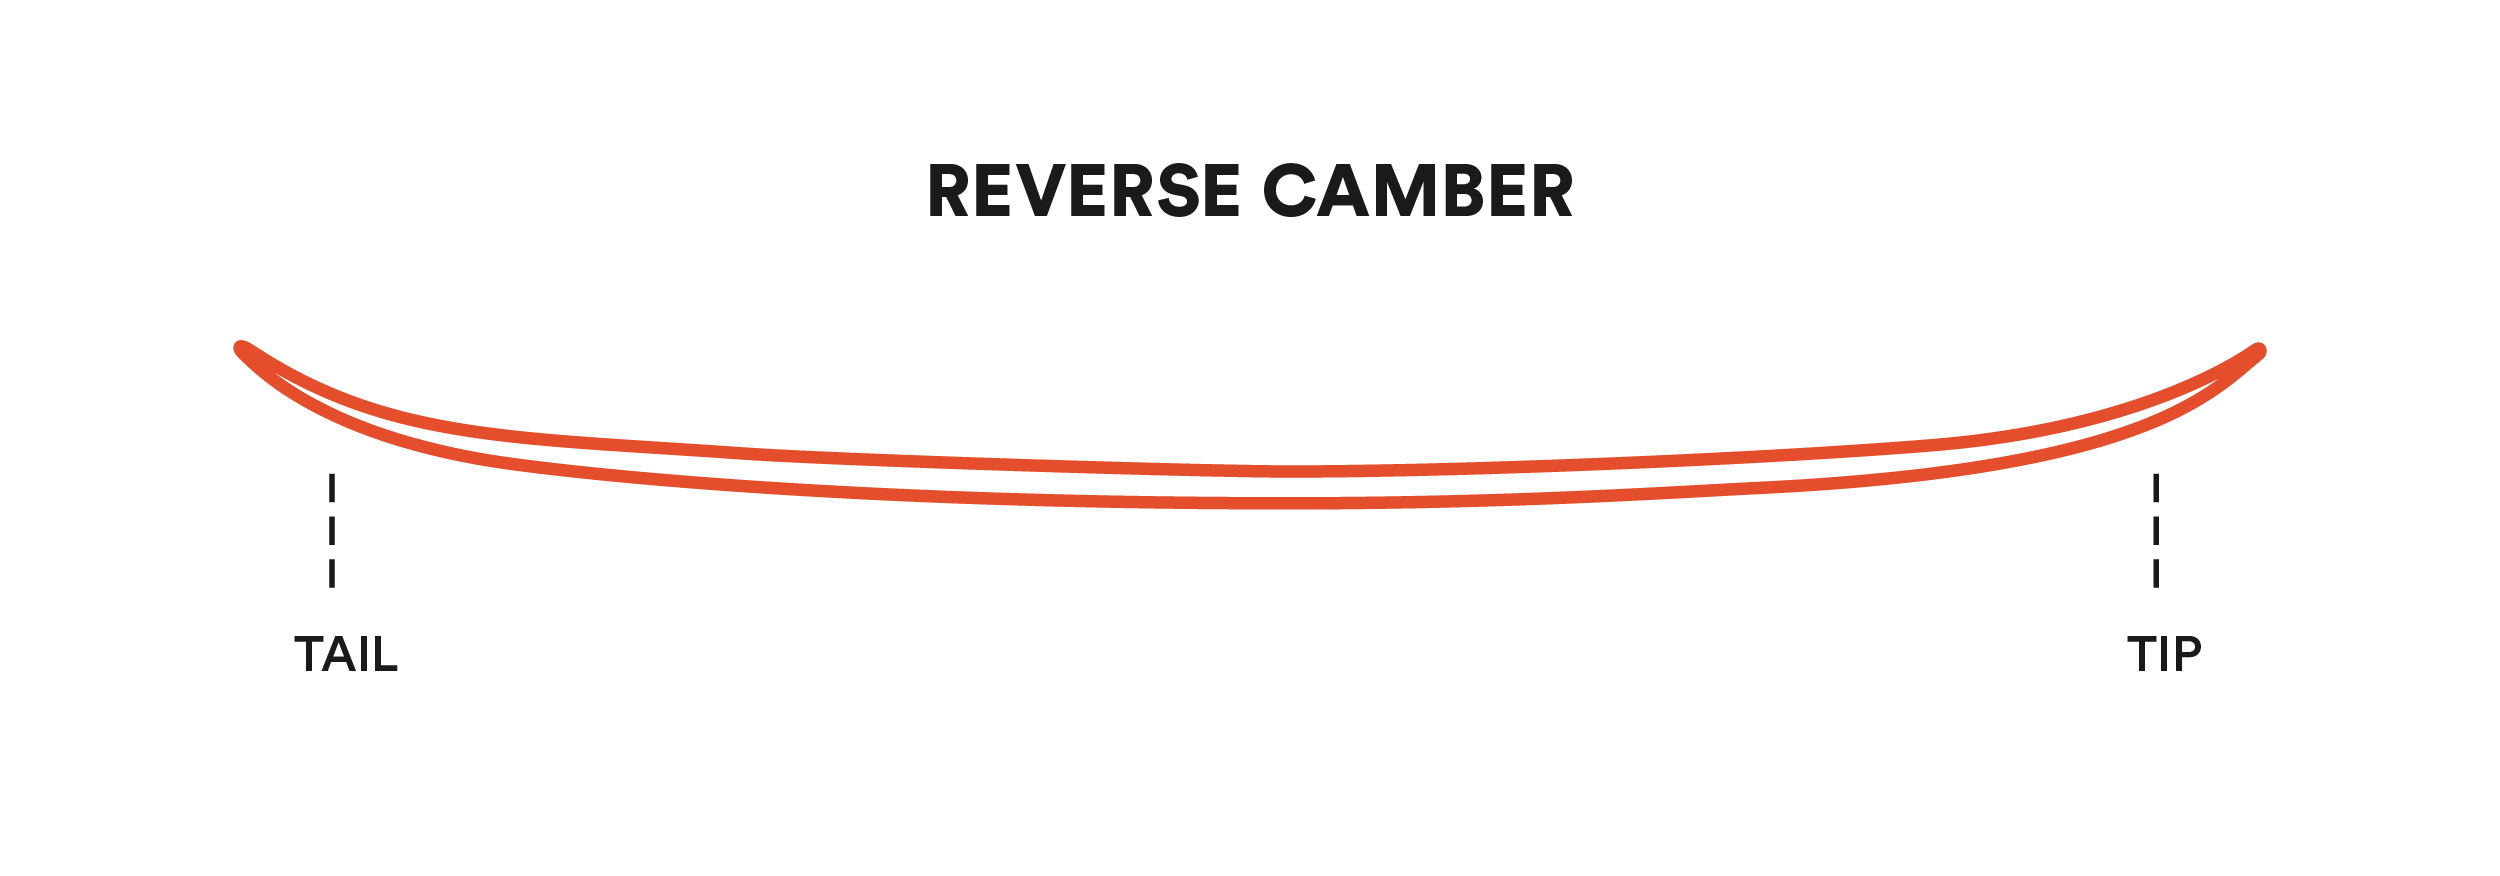 Graphic showing reverse camber profile (shaped like a smile)